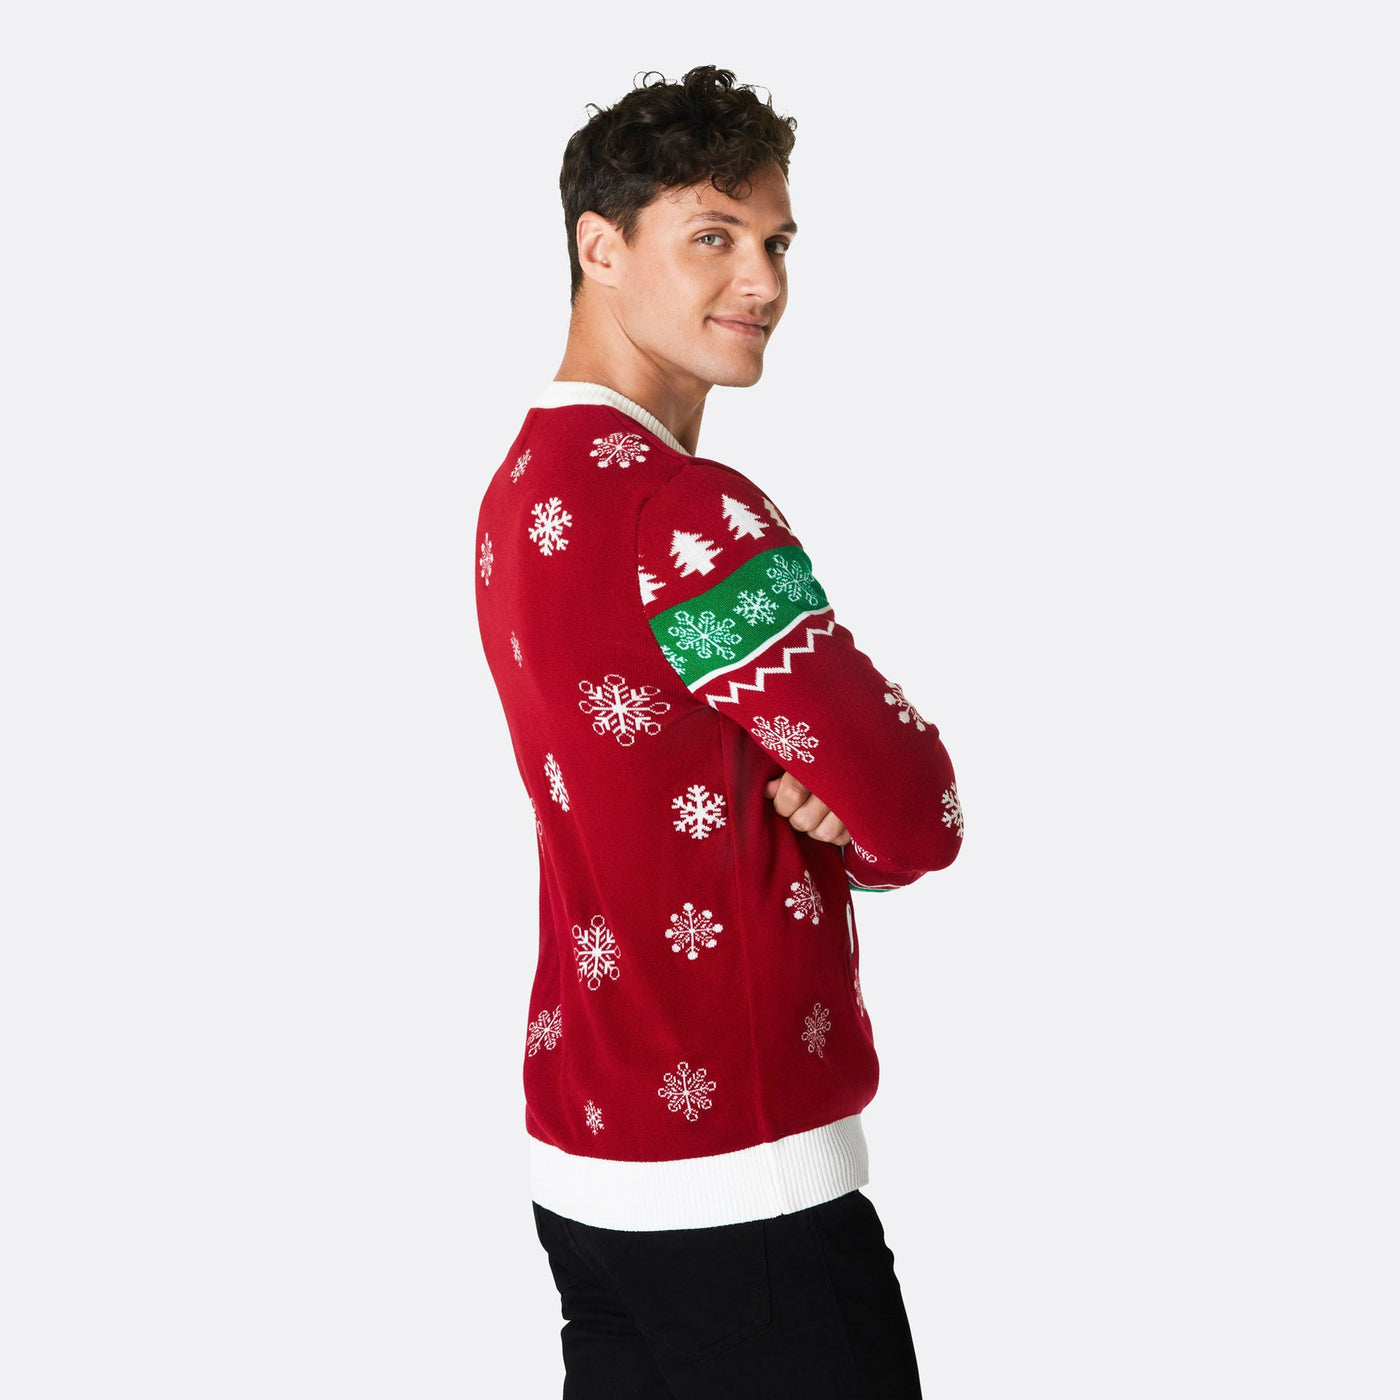 Men's I'm Sexy and I Snow It Christmas Sweater